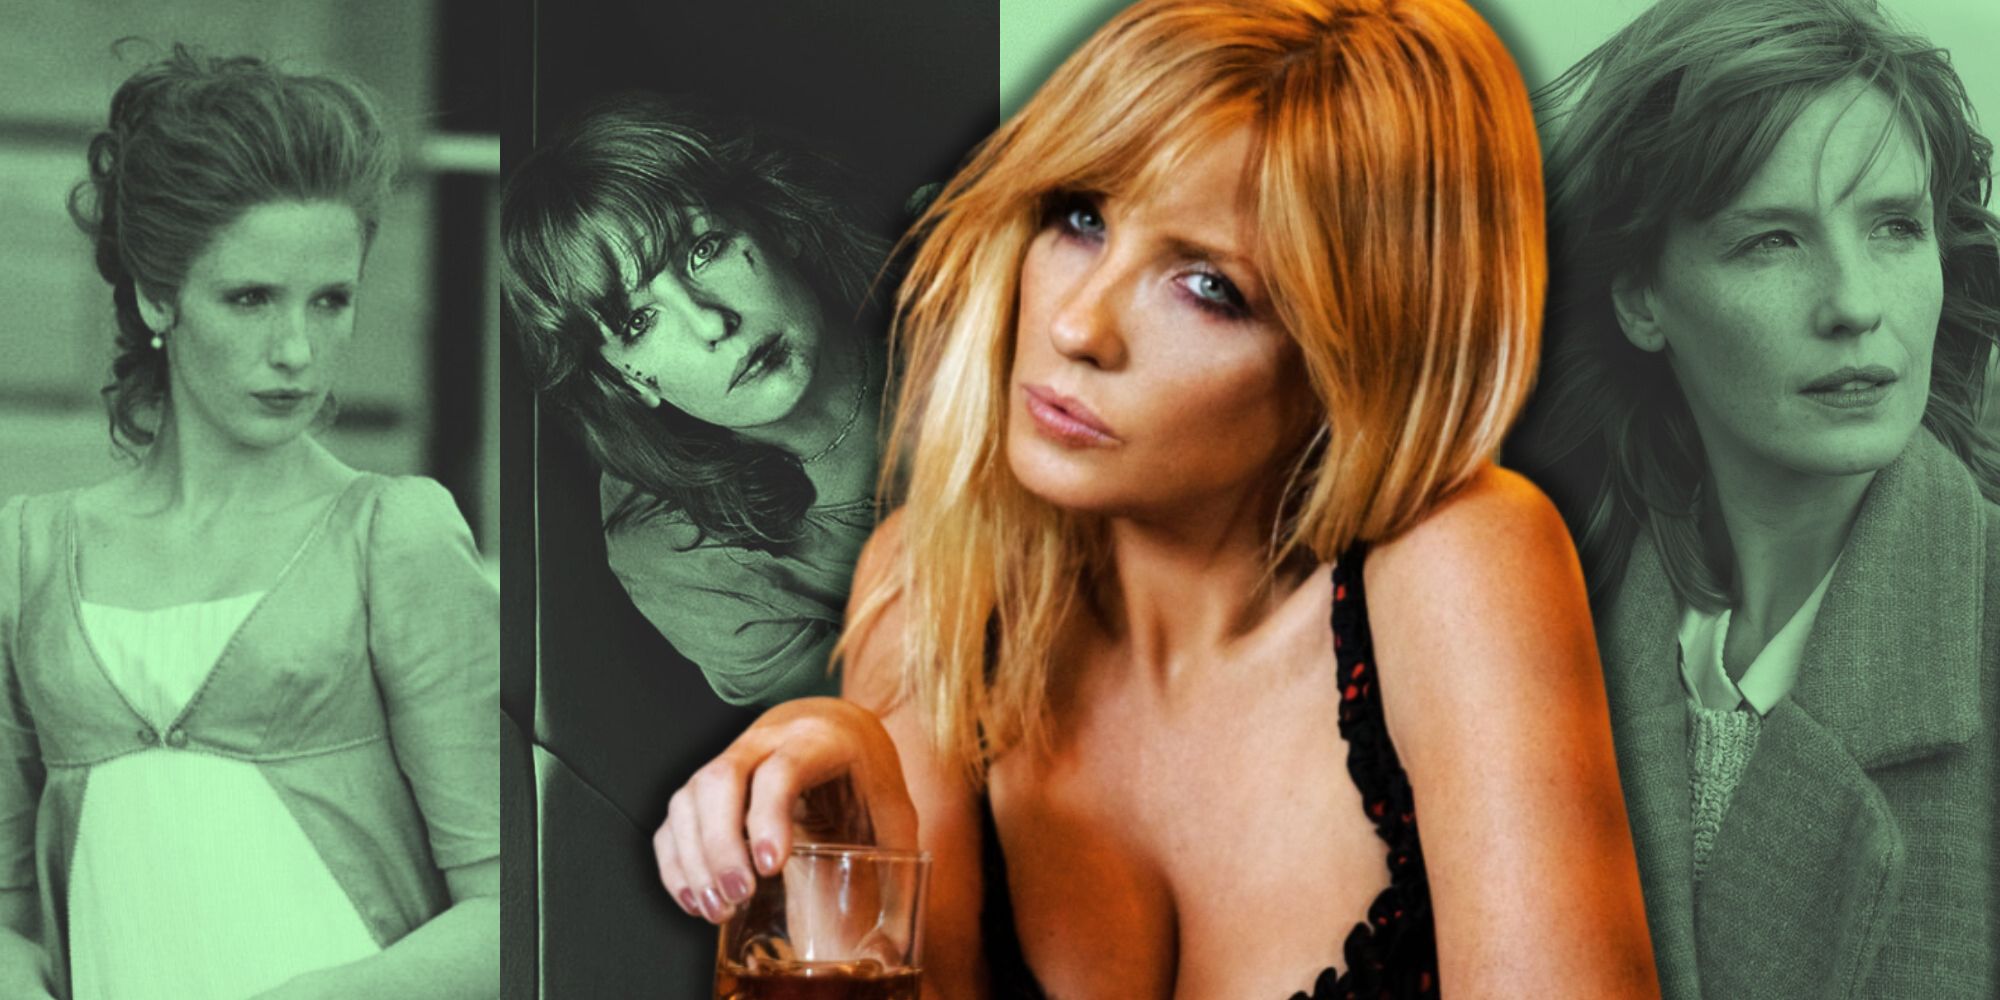 Kelly Reilly in Pride and Prejudice, 10x10, Yellowstone, and Cavalry